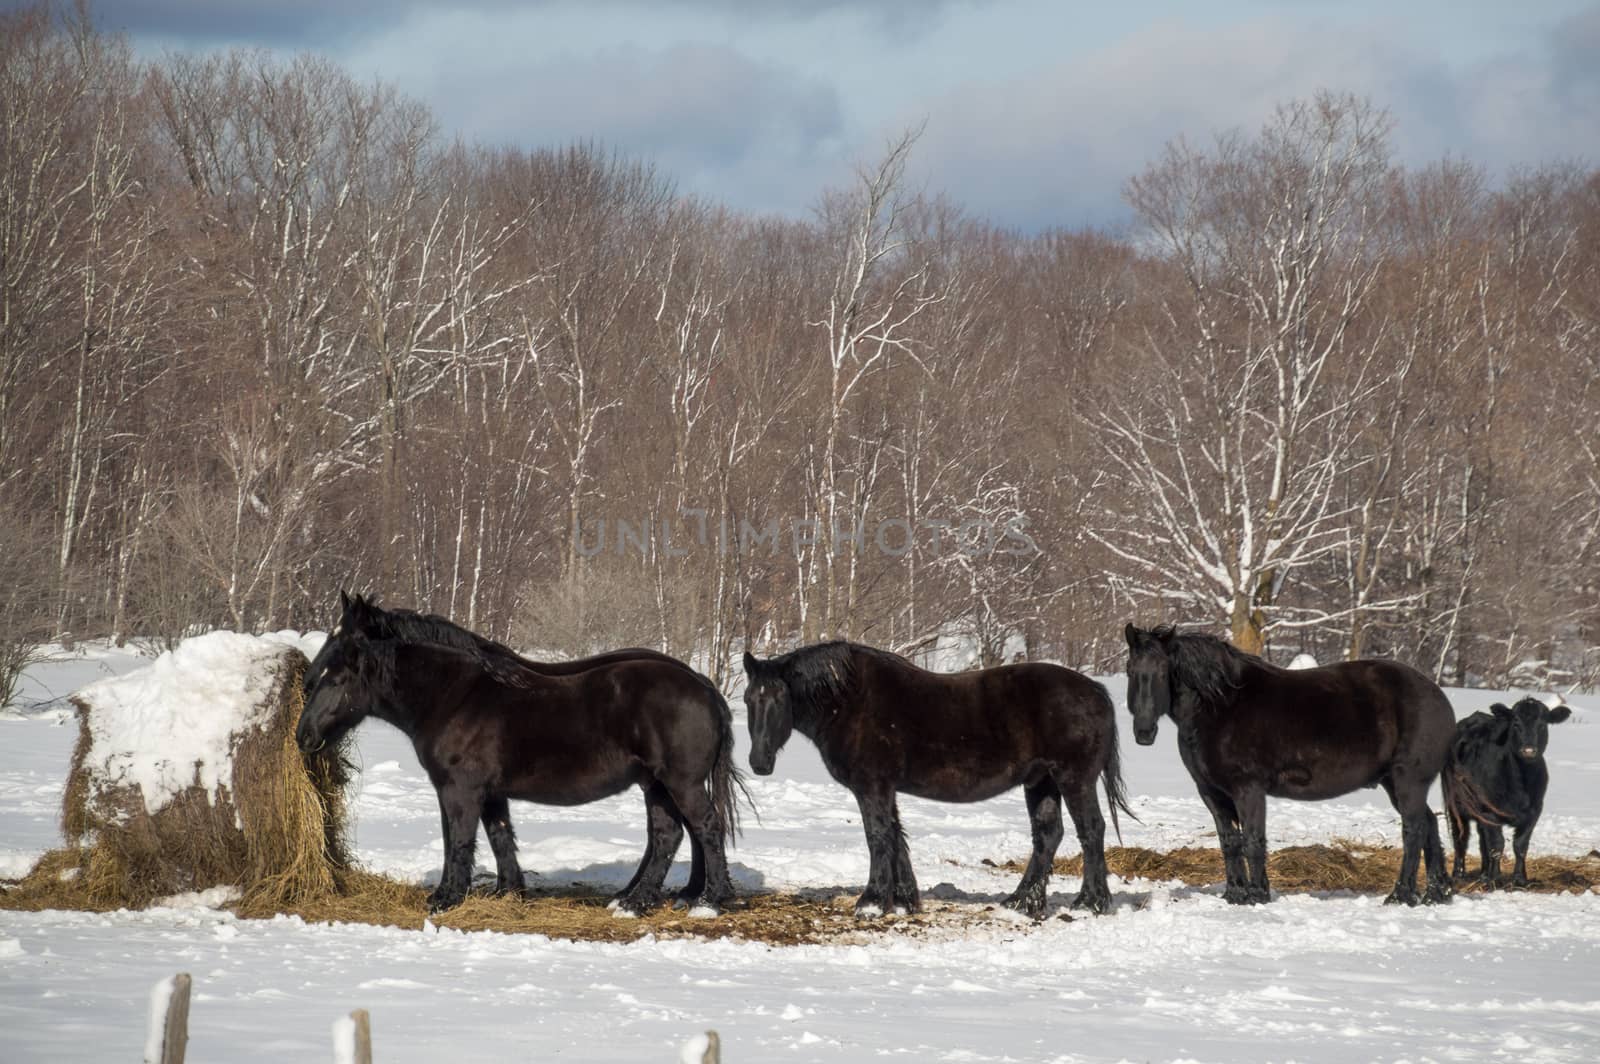 Three black horses  in their pasture field in the snow with trees behind.  Have a big round hay bale with snow on it.